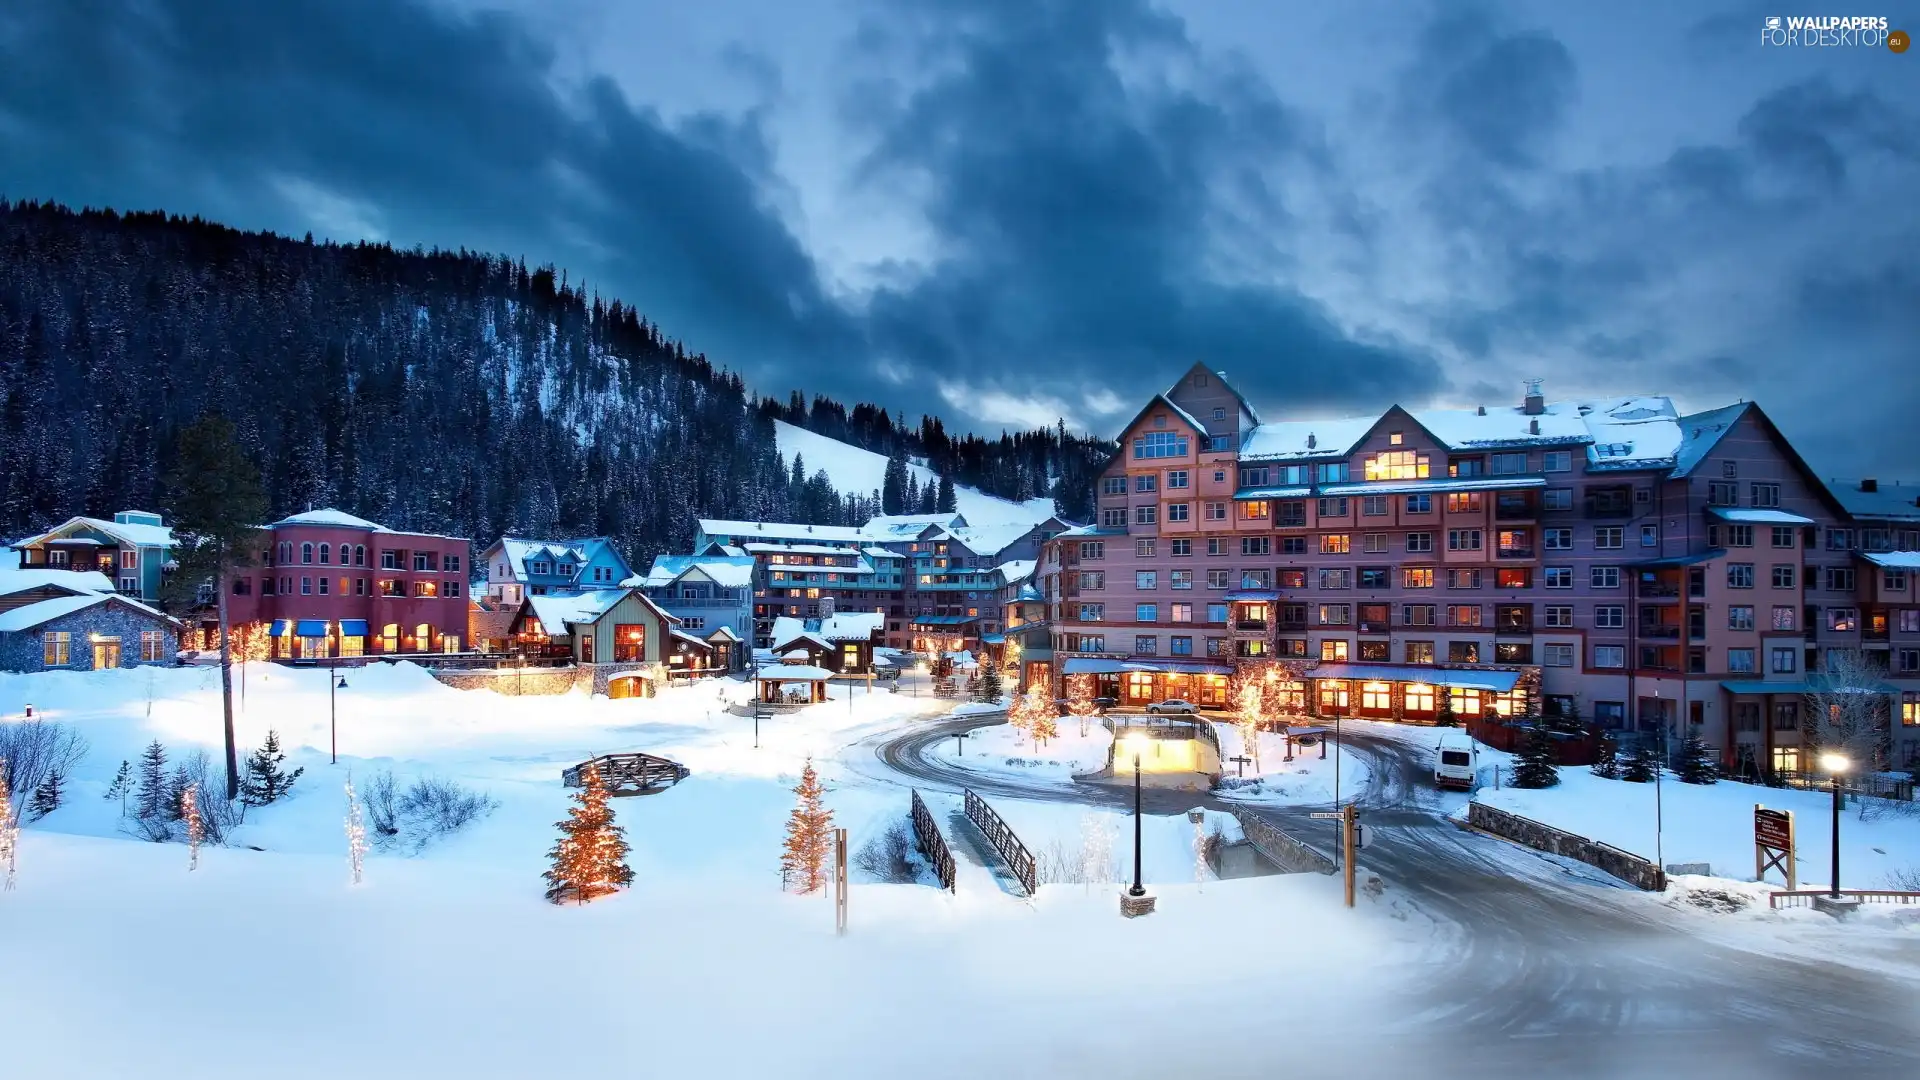 Hotels, The United States, winter, Colorado, center